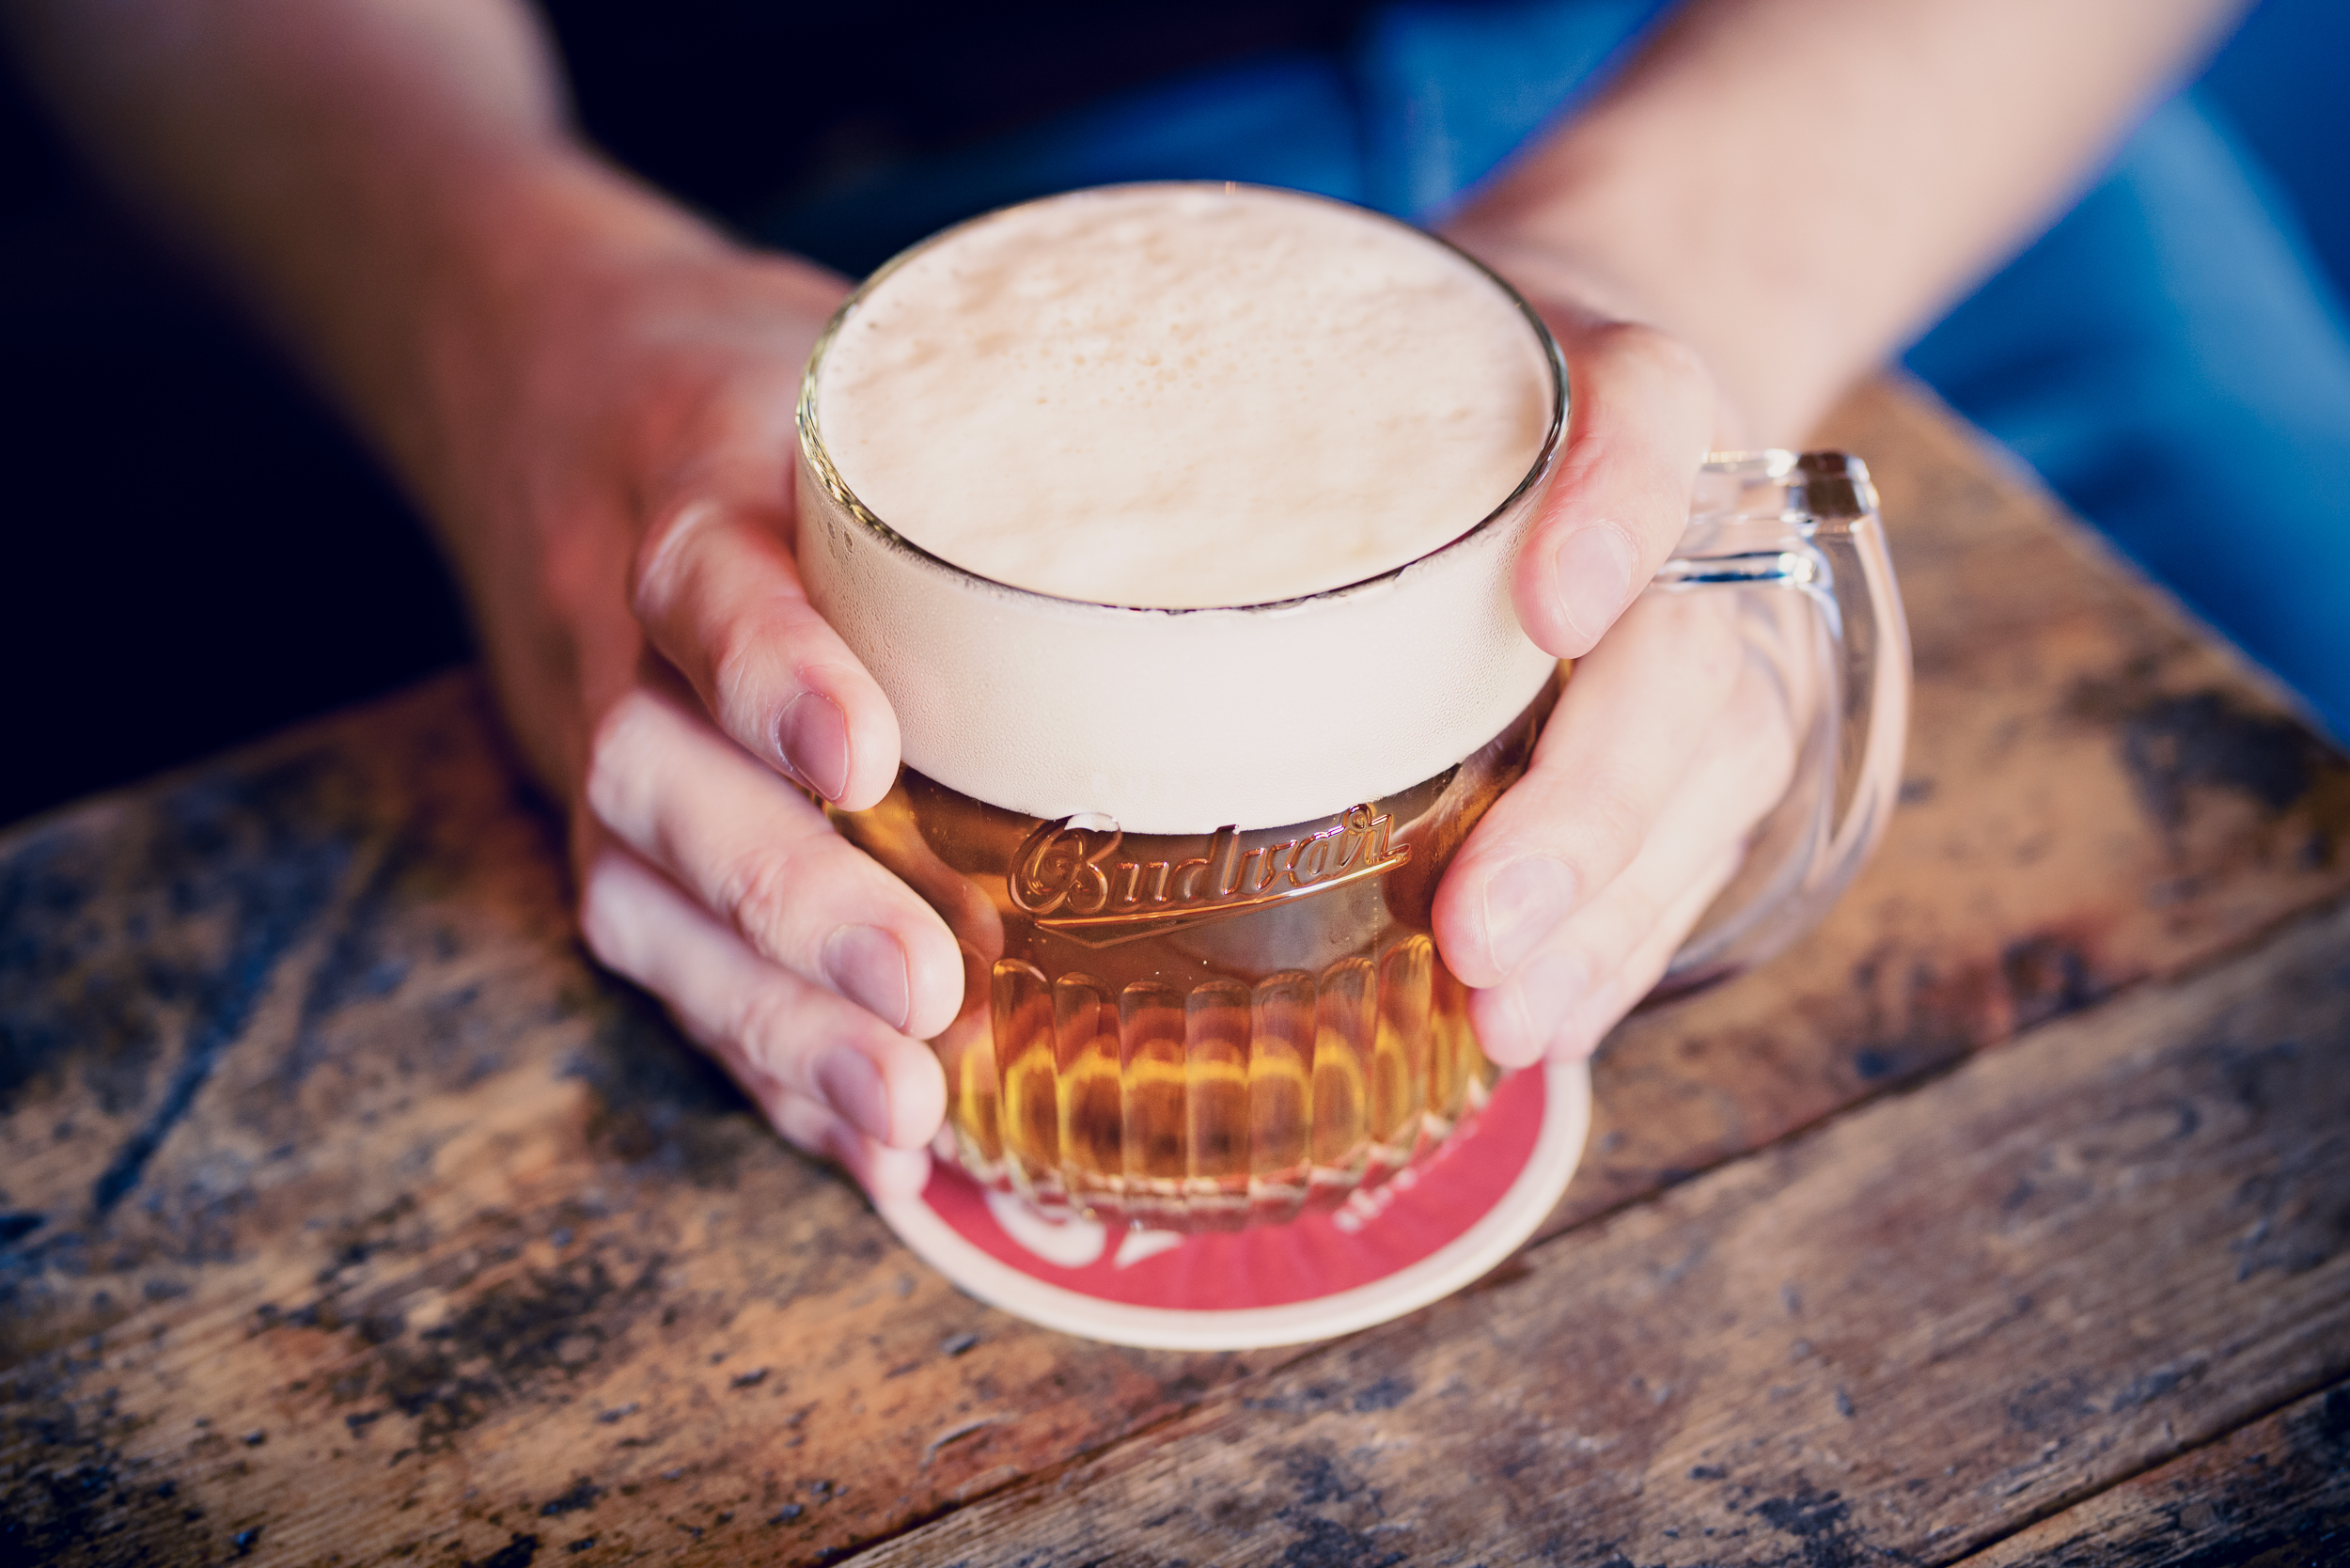 Two hands holding a glas of beer on a wooden table (Photo: Courtesy of Budweiser Budvar)